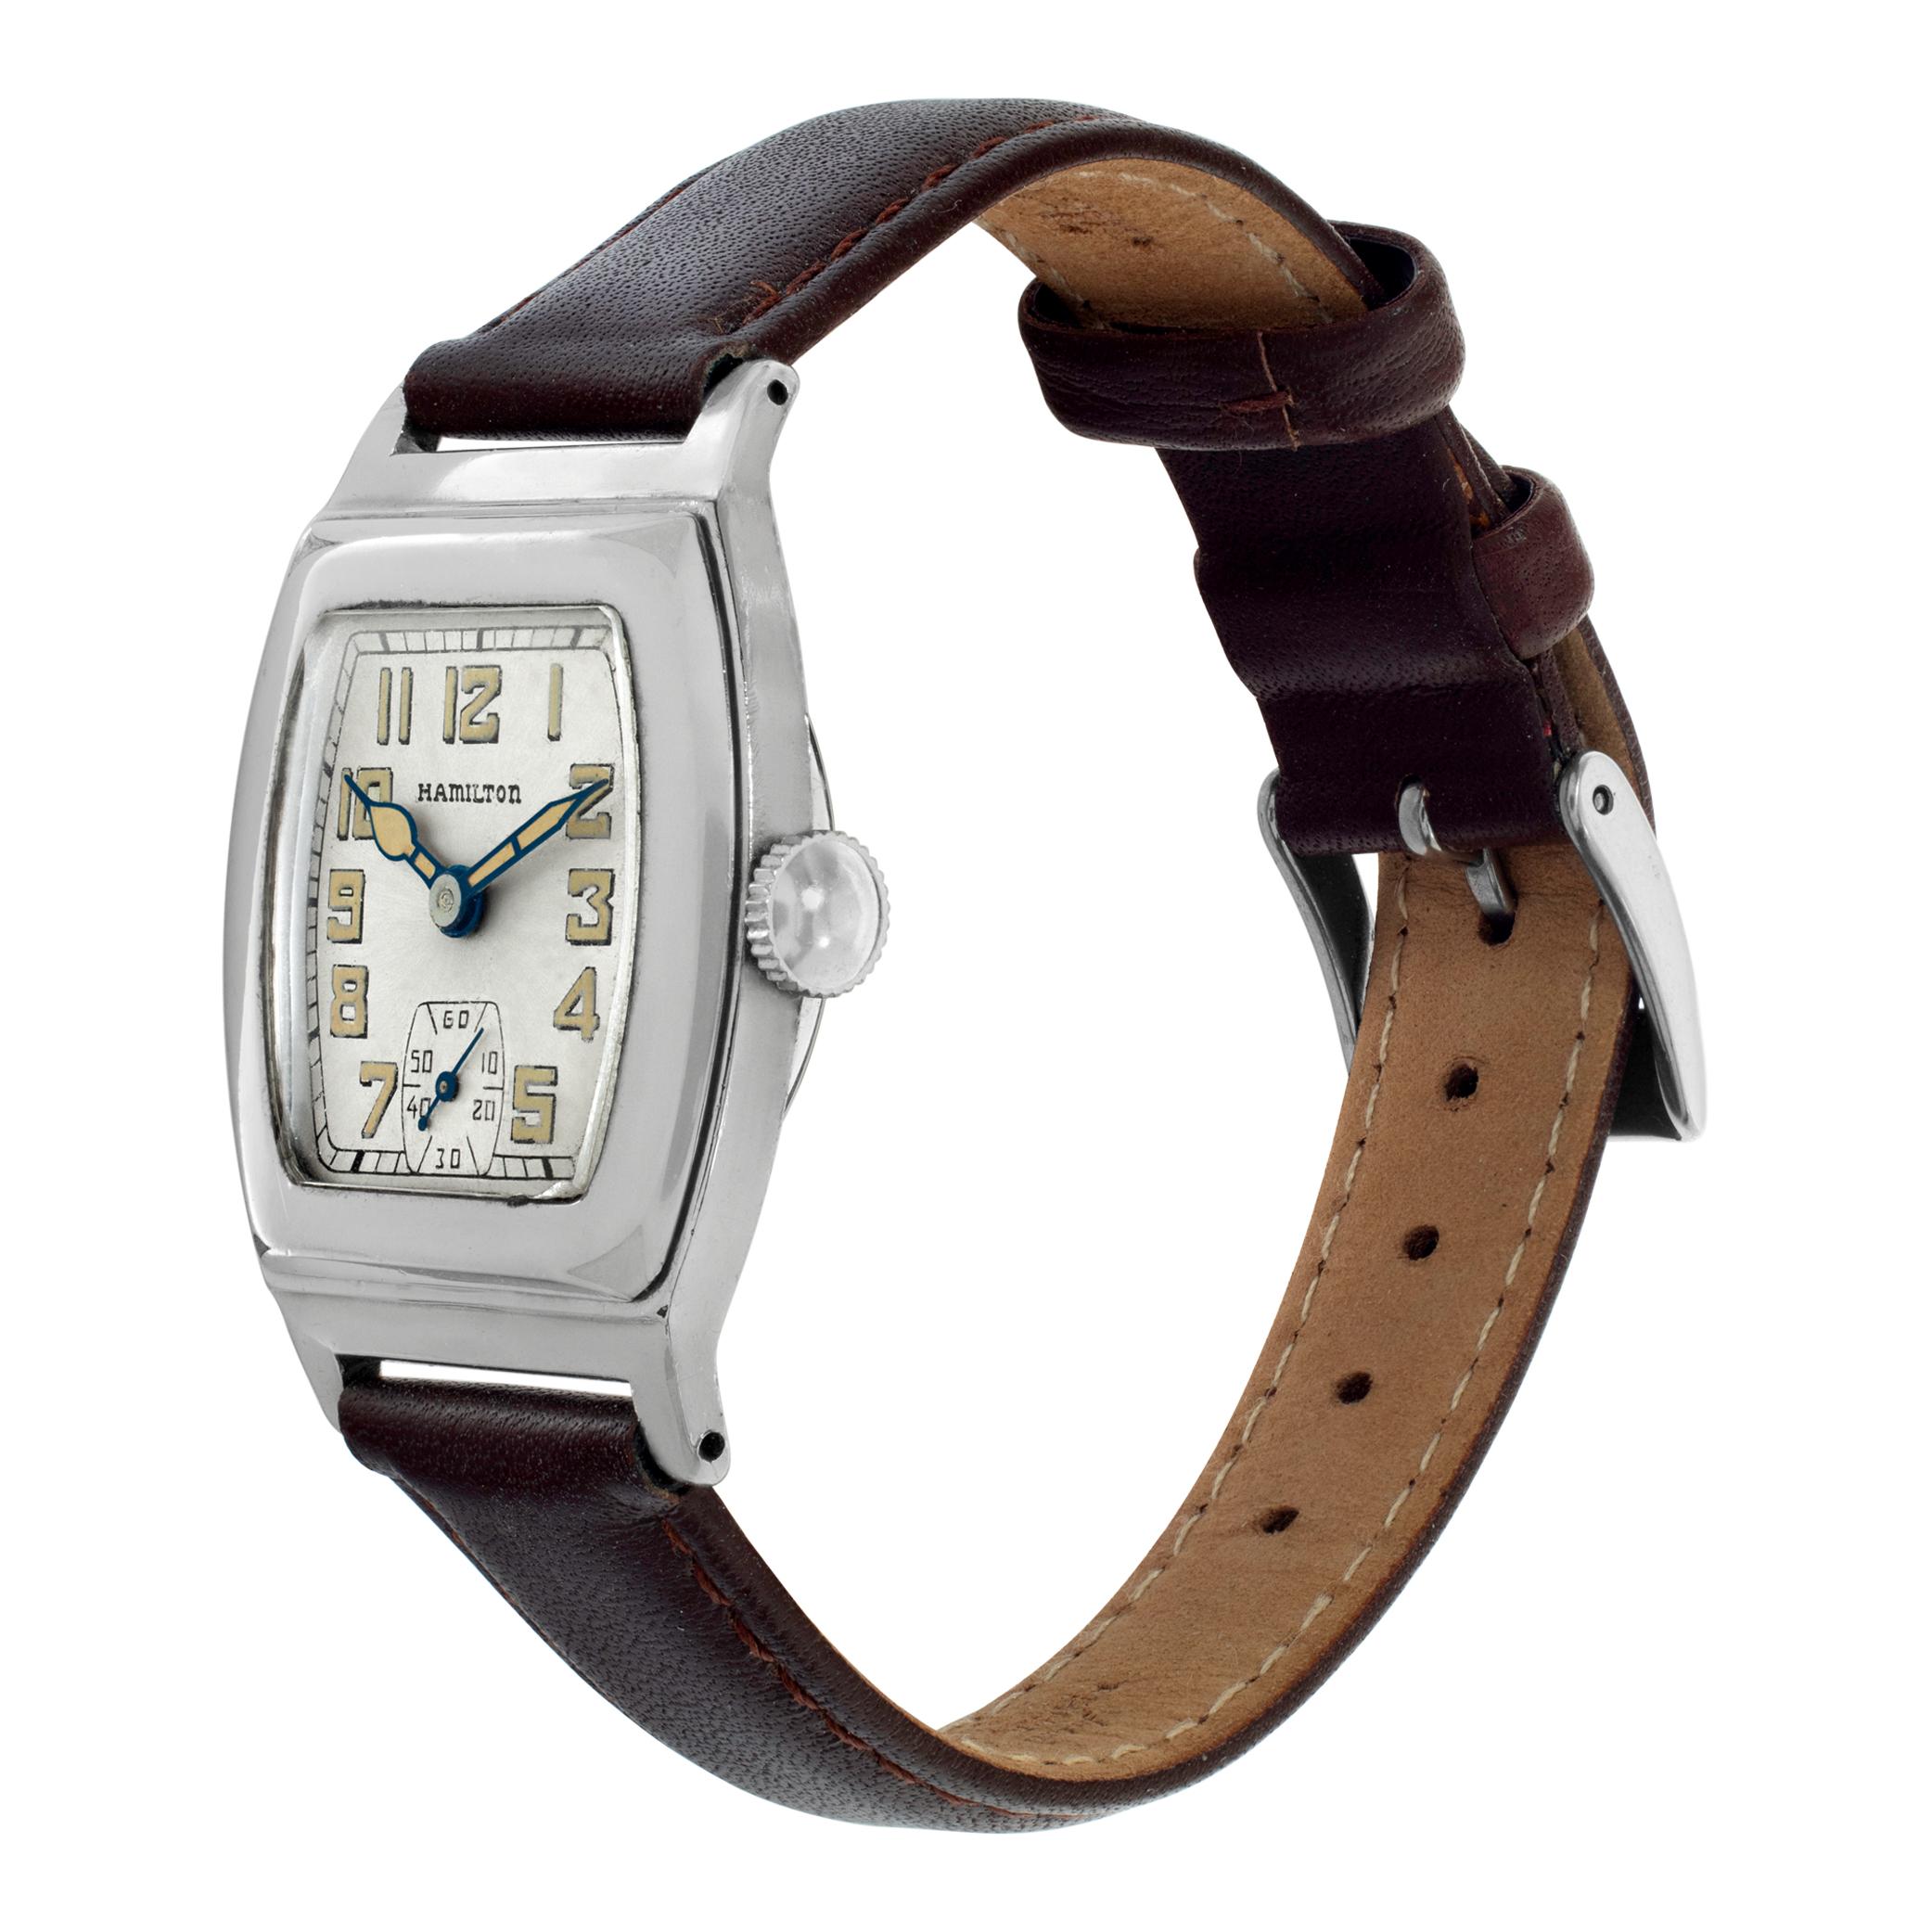 Hamilton Raleigh manual wind watch in white gold fill on a calfskin strap. Auto w/ subseconds. 29 mm case size. Ref 759768. Fine Pre-owned Hamilton Watch.

 Certified preowned Vintage Hamilton Raleigh watch on a Brown calfskin band with a Stainless